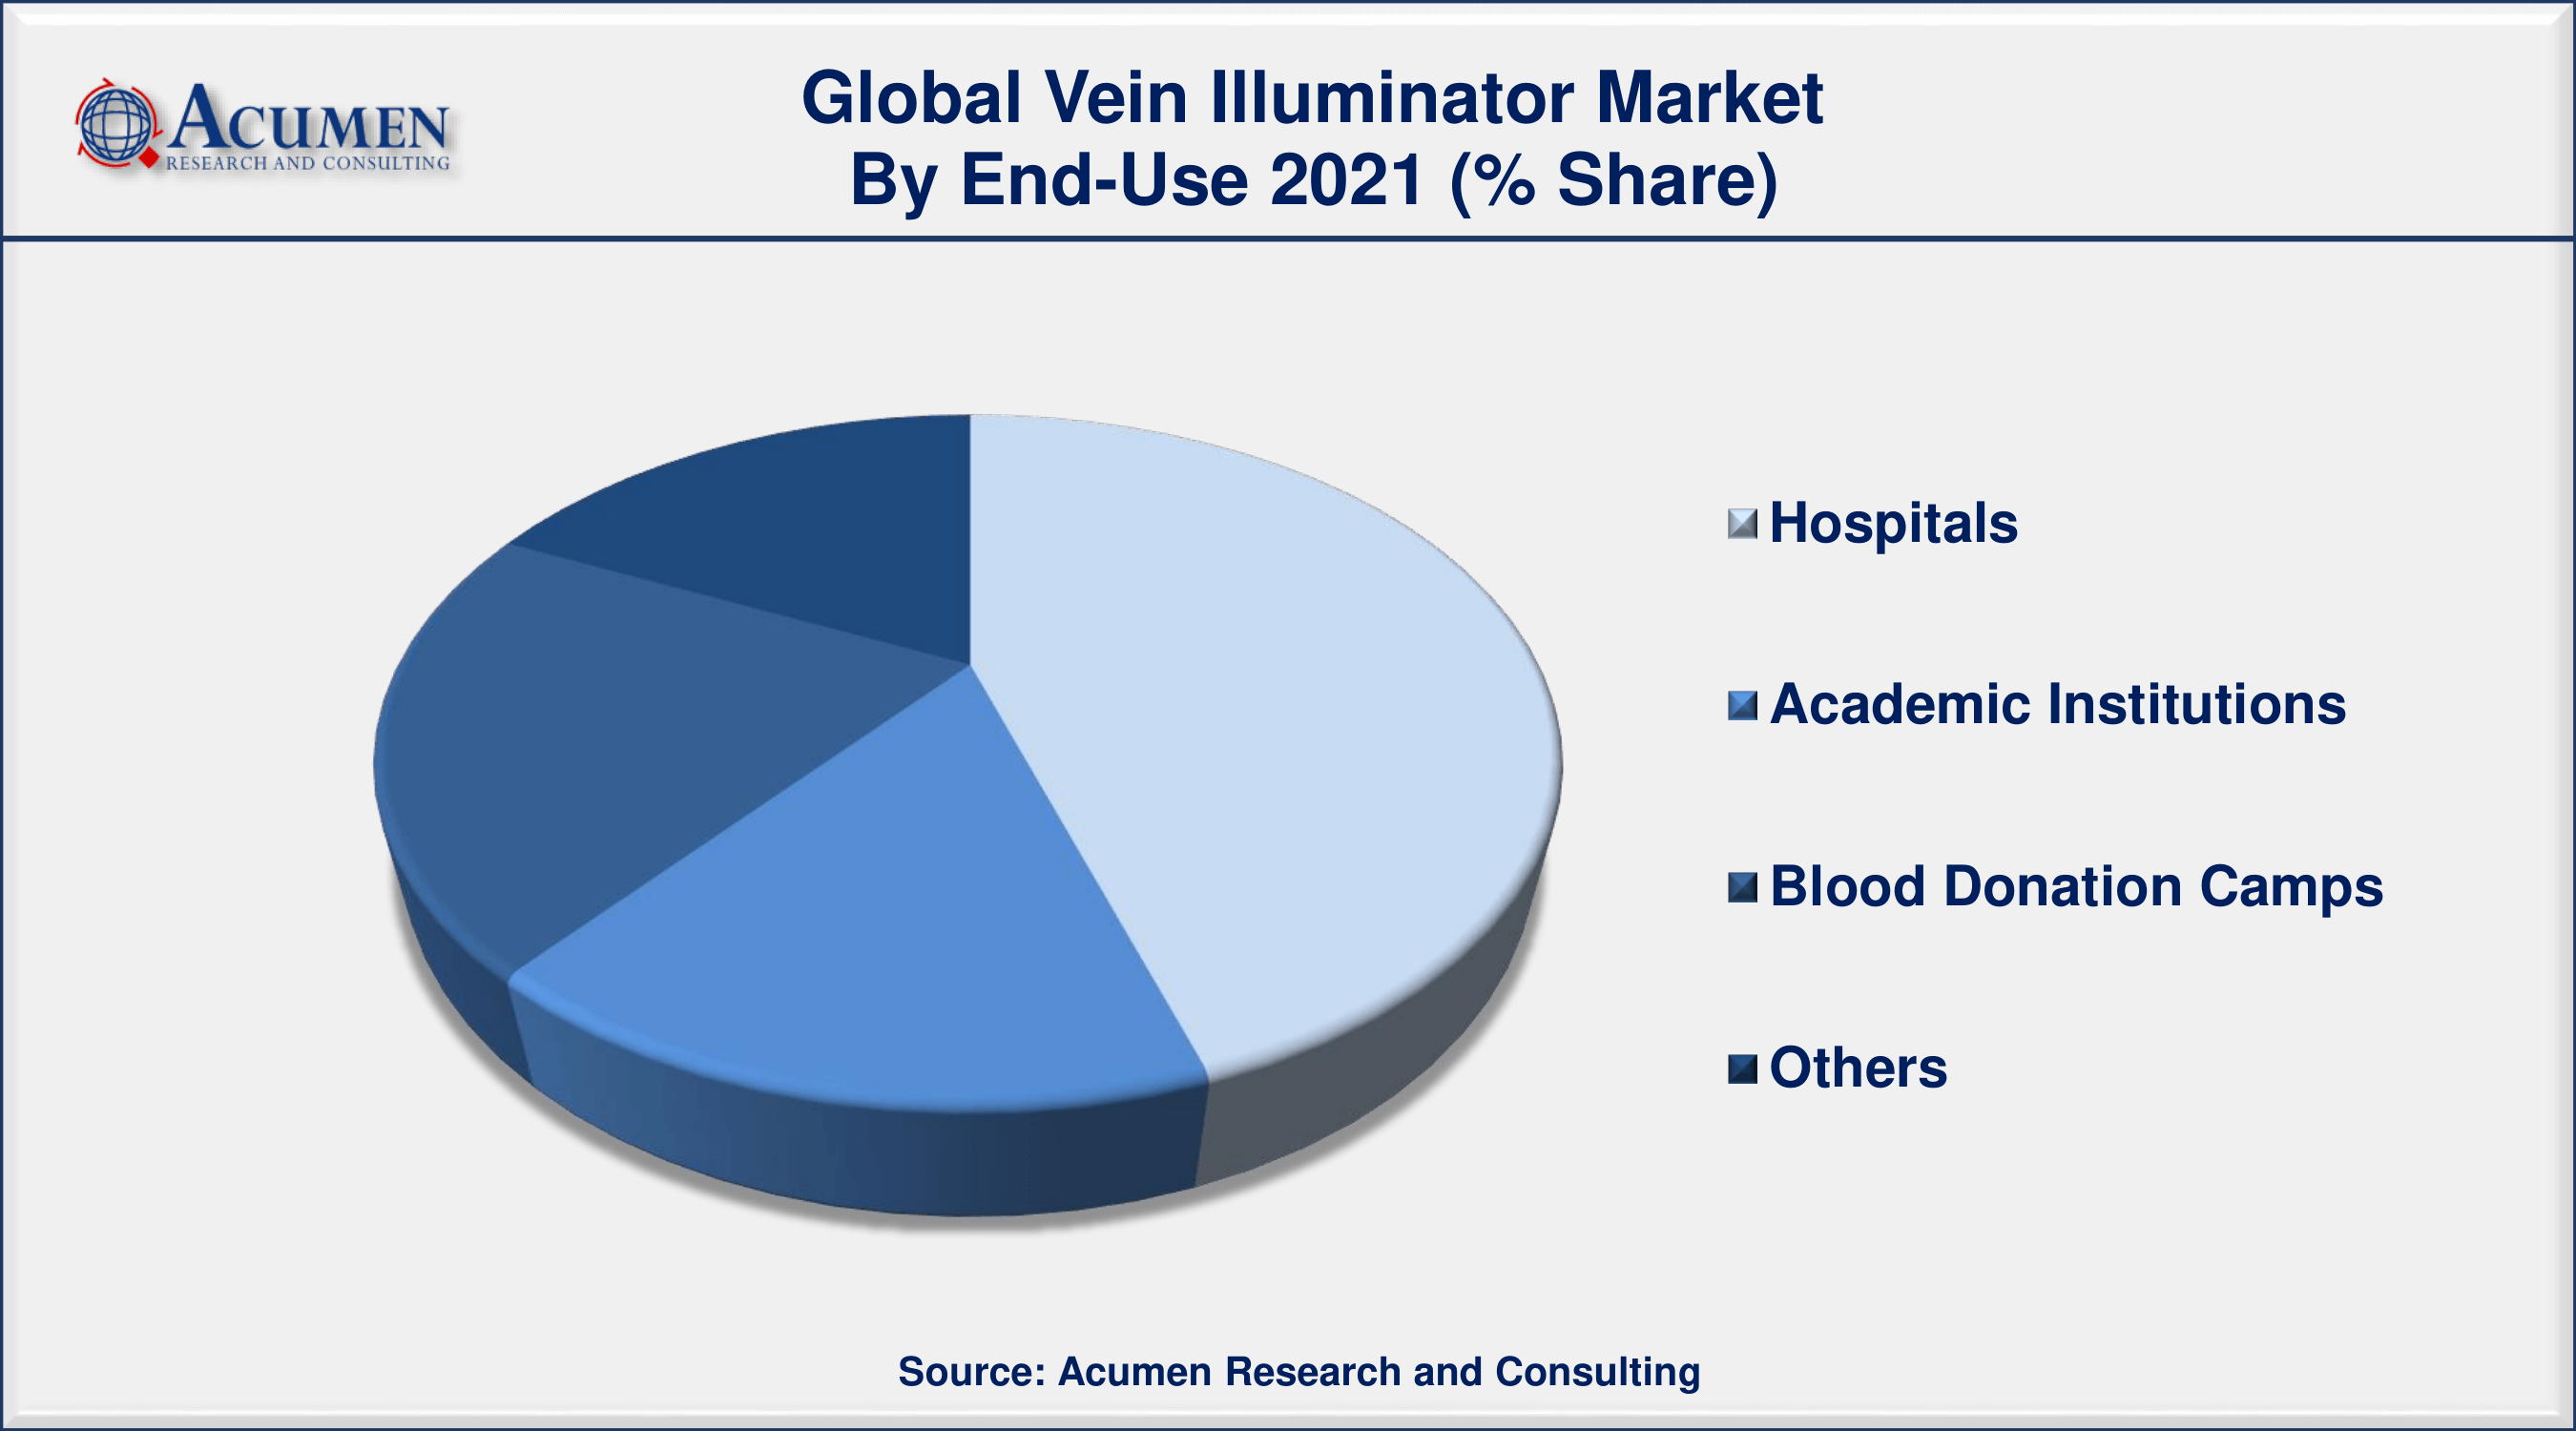 Among end-use, hospital sector engaged more than 45% of the total market share